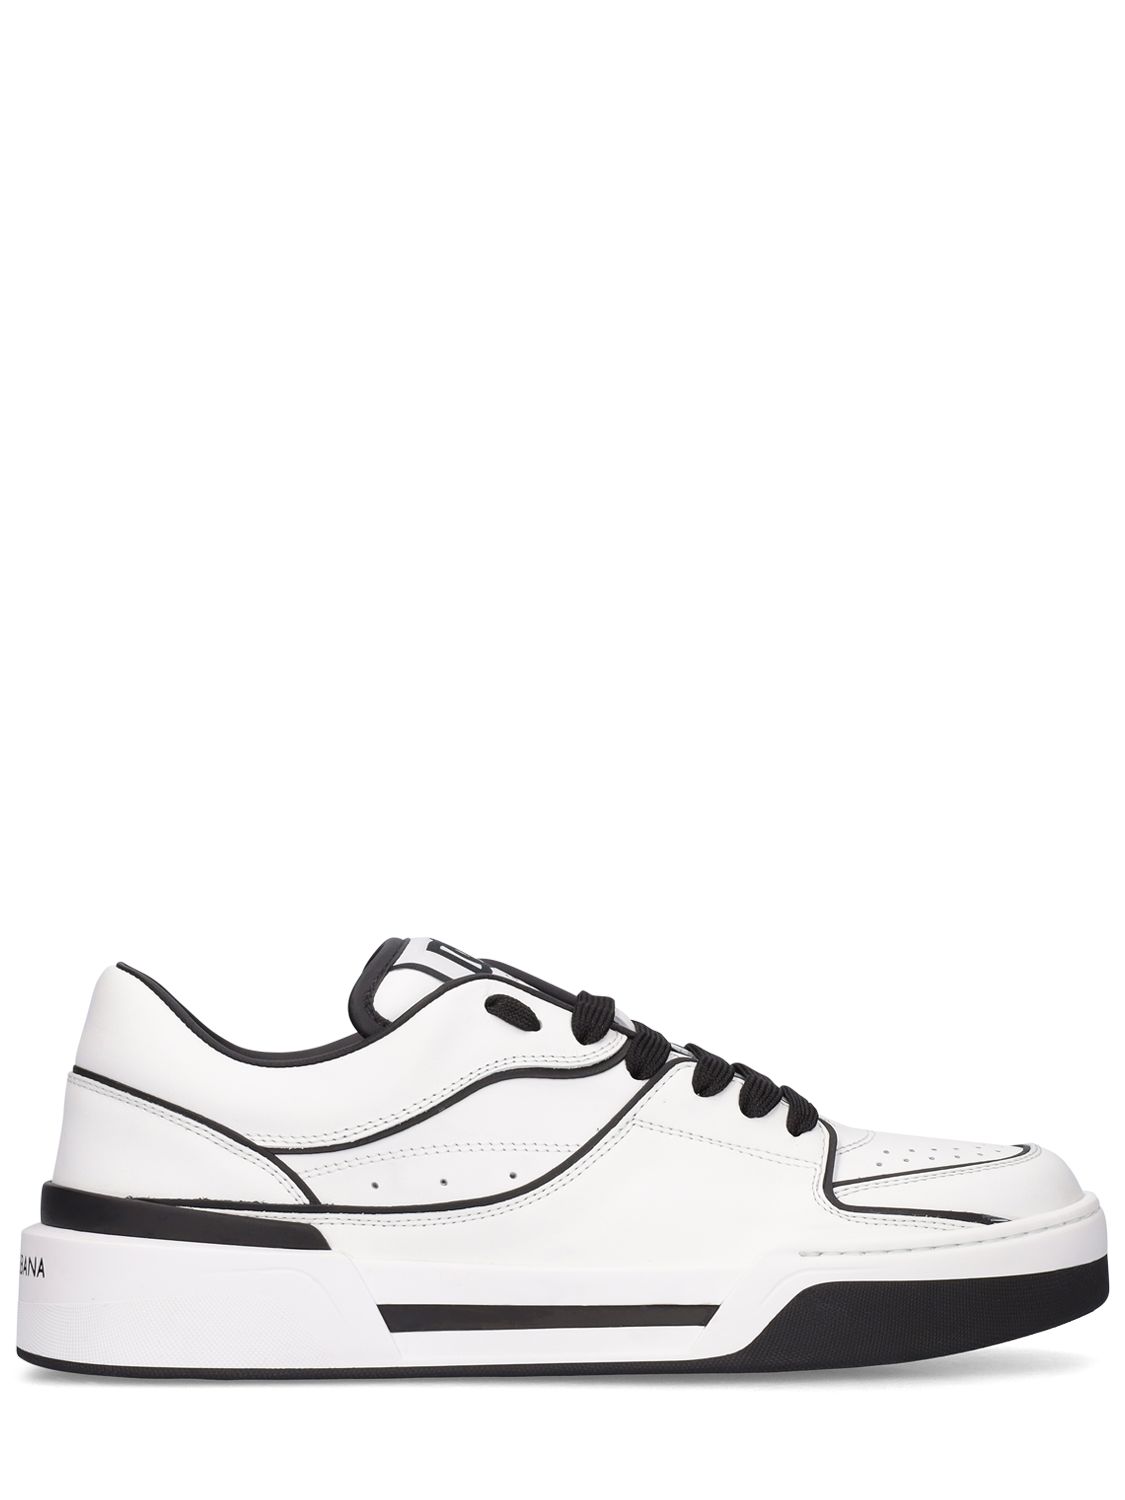 Dolce & Gabbana New Roma Leather Sneakers In White,black